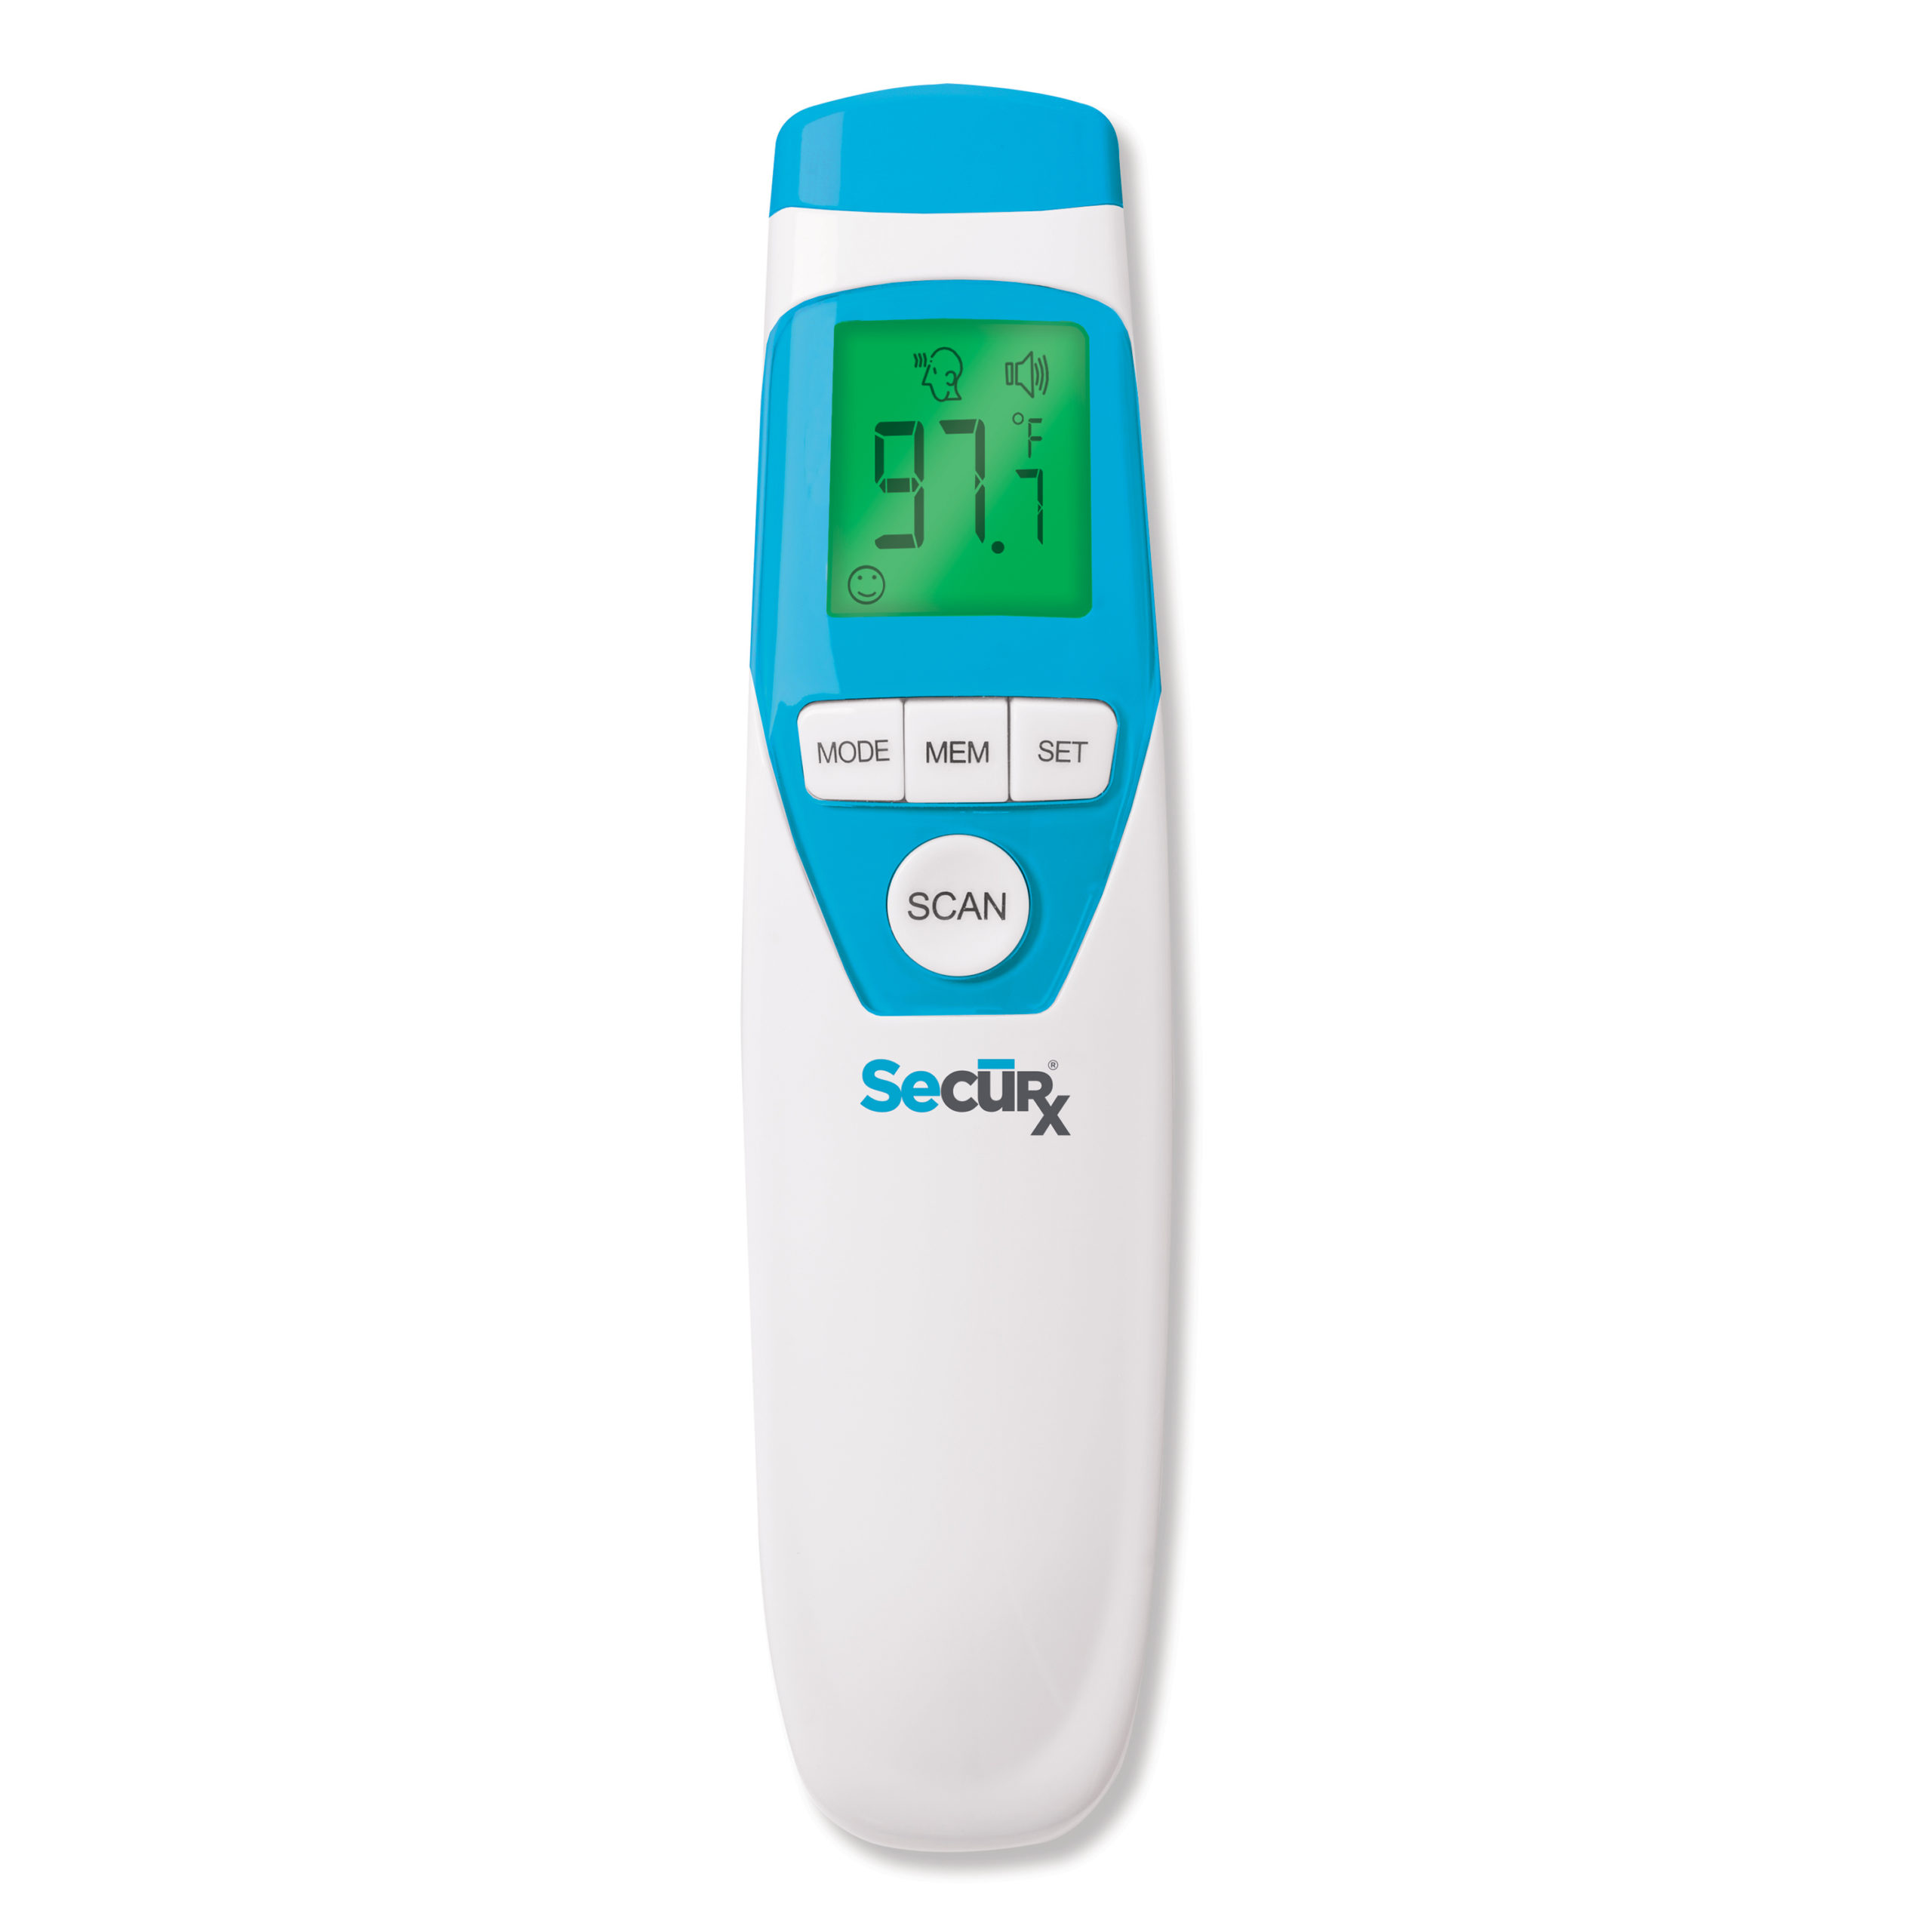 https://www.maverickthermometers.com/wp-content/uploads/2020/09/DT-8836P_2-scaled.jpg